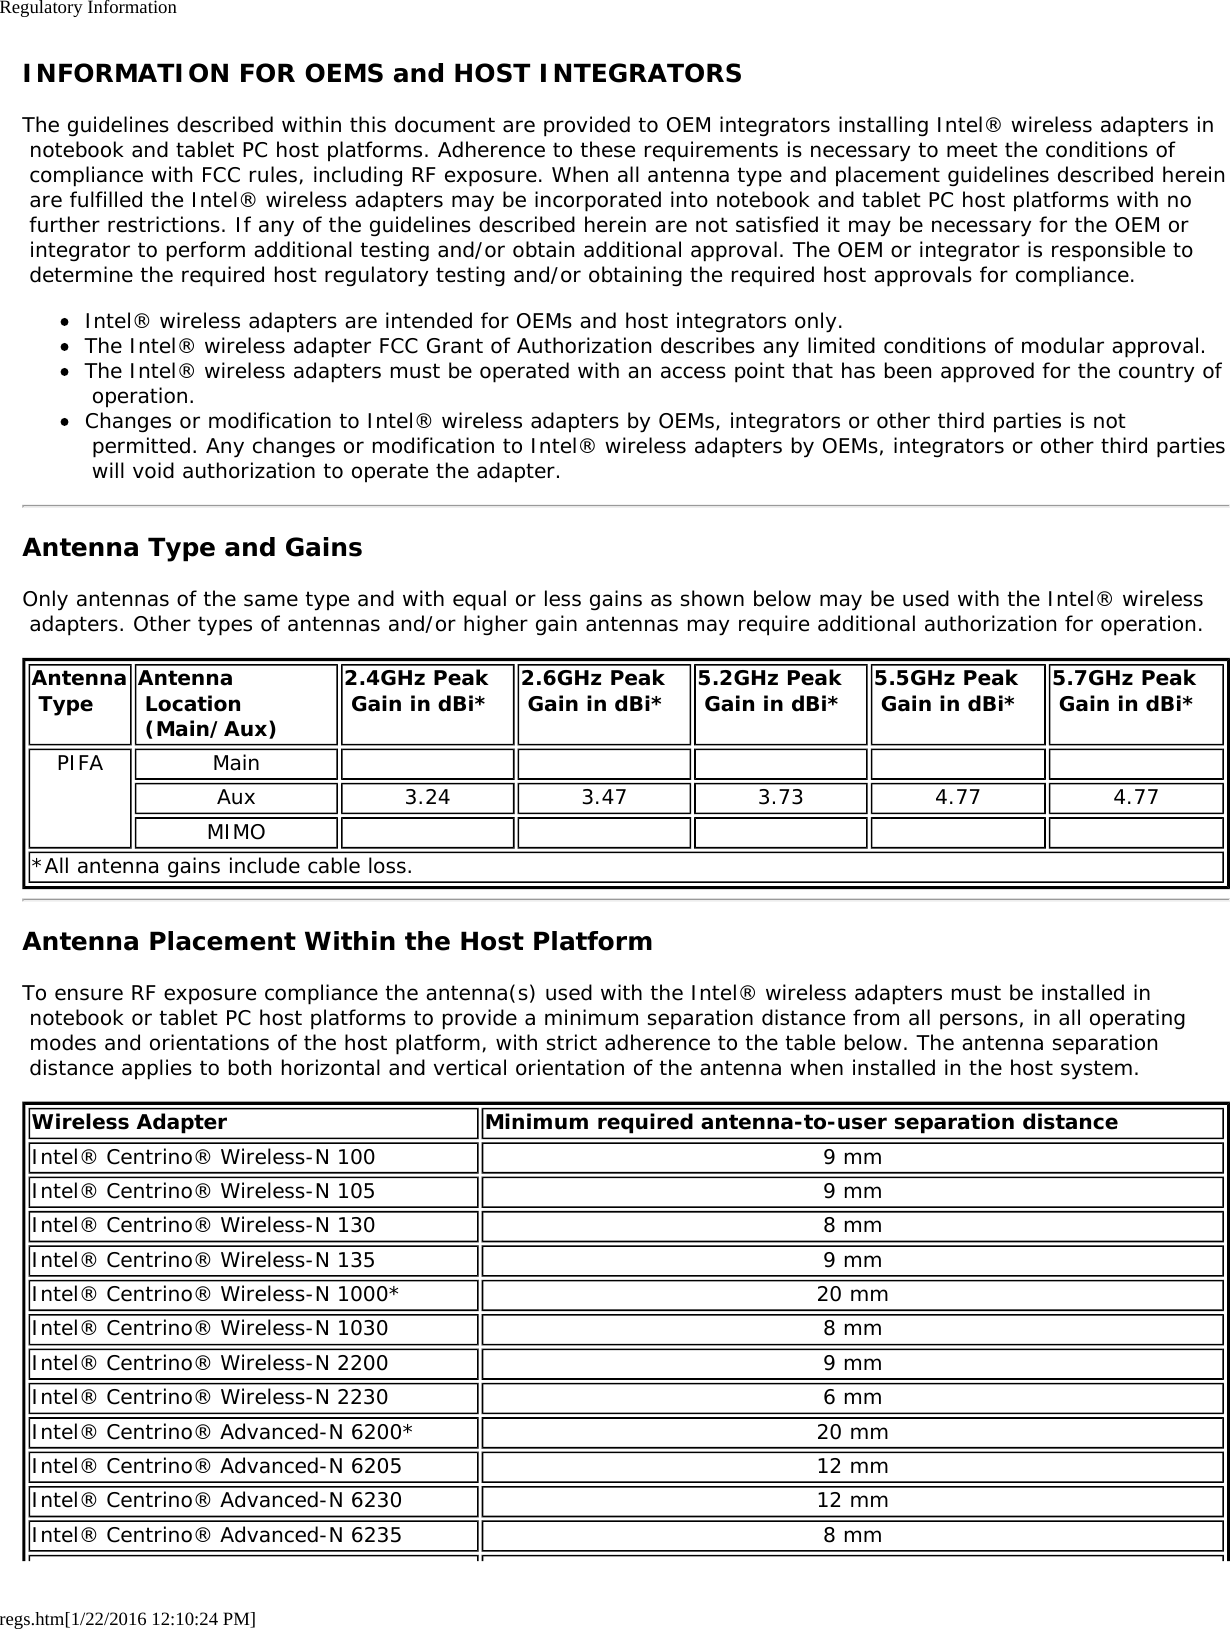 Regulatory Informationregs.htm[1/22/2016 12:10:24 PM]INFORMATION FOR OEMS and HOST INTEGRATORSThe guidelines described within this document are provided to OEM integrators installing Intel® wireless adapters in notebook and tablet PC host platforms. Adherence to these requirements is necessary to meet the conditions of compliance with FCC rules, including RF exposure. When all antenna type and placement guidelines described herein are fulfilled the Intel® wireless adapters may be incorporated into notebook and tablet PC host platforms with no further restrictions. If any of the guidelines described herein are not satisfied it may be necessary for the OEM or integrator to perform additional testing and/or obtain additional approval. The OEM or integrator is responsible to determine the required host regulatory testing and/or obtaining the required host approvals for compliance.Intel® wireless adapters are intended for OEMs and host integrators only.The Intel® wireless adapter FCC Grant of Authorization describes any limited conditions of modular approval.The Intel® wireless adapters must be operated with an access point that has been approved for the country of operation.Changes or modification to Intel® wireless adapters by OEMs, integrators or other third parties is not permitted. Any changes or modification to Intel® wireless adapters by OEMs, integrators or other third parties will void authorization to operate the adapter.Antenna Type and GainsOnly antennas of the same type and with equal or less gains as shown below may be used with the Intel® wireless adapters. Other types of antennas and/or higher gain antennas may require additional authorization for operation.Antenna Type Antenna Location (Main/Aux)2.4GHz Peak Gain in dBi* 2.6GHz Peak Gain in dBi* 5.2GHz Peak Gain in dBi* 5.5GHz Peak Gain in dBi* 5.7GHz Peak Gain in dBi*PIFA MainAux 3.24 3.47 3.73 4.77 4.77MIMO*All antenna gains include cable loss.Antenna Placement Within the Host PlatformTo ensure RF exposure compliance the antenna(s) used with the Intel® wireless adapters must be installed in notebook or tablet PC host platforms to provide a minimum separation distance from all persons, in all operating modes and orientations of the host platform, with strict adherence to the table below. The antenna separation distance applies to both horizontal and vertical orientation of the antenna when installed in the host system.Wireless Adapter Minimum required antenna-to-user separation distanceIntel® Centrino® Wireless-N 100 9 mmIntel® Centrino® Wireless-N 105 9 mmIntel® Centrino® Wireless-N 130 8 mmIntel® Centrino® Wireless-N 135 9 mmIntel® Centrino® Wireless-N 1000* 20 mmIntel® Centrino® Wireless-N 1030 8 mmIntel® Centrino® Wireless-N 2200 9 mmIntel® Centrino® Wireless-N 2230 6 mmIntel® Centrino® Advanced-N 6200* 20 mmIntel® Centrino® Advanced-N 6205 12 mmIntel® Centrino® Advanced-N 6230 12 mmIntel® Centrino® Advanced-N 6235 8 mm